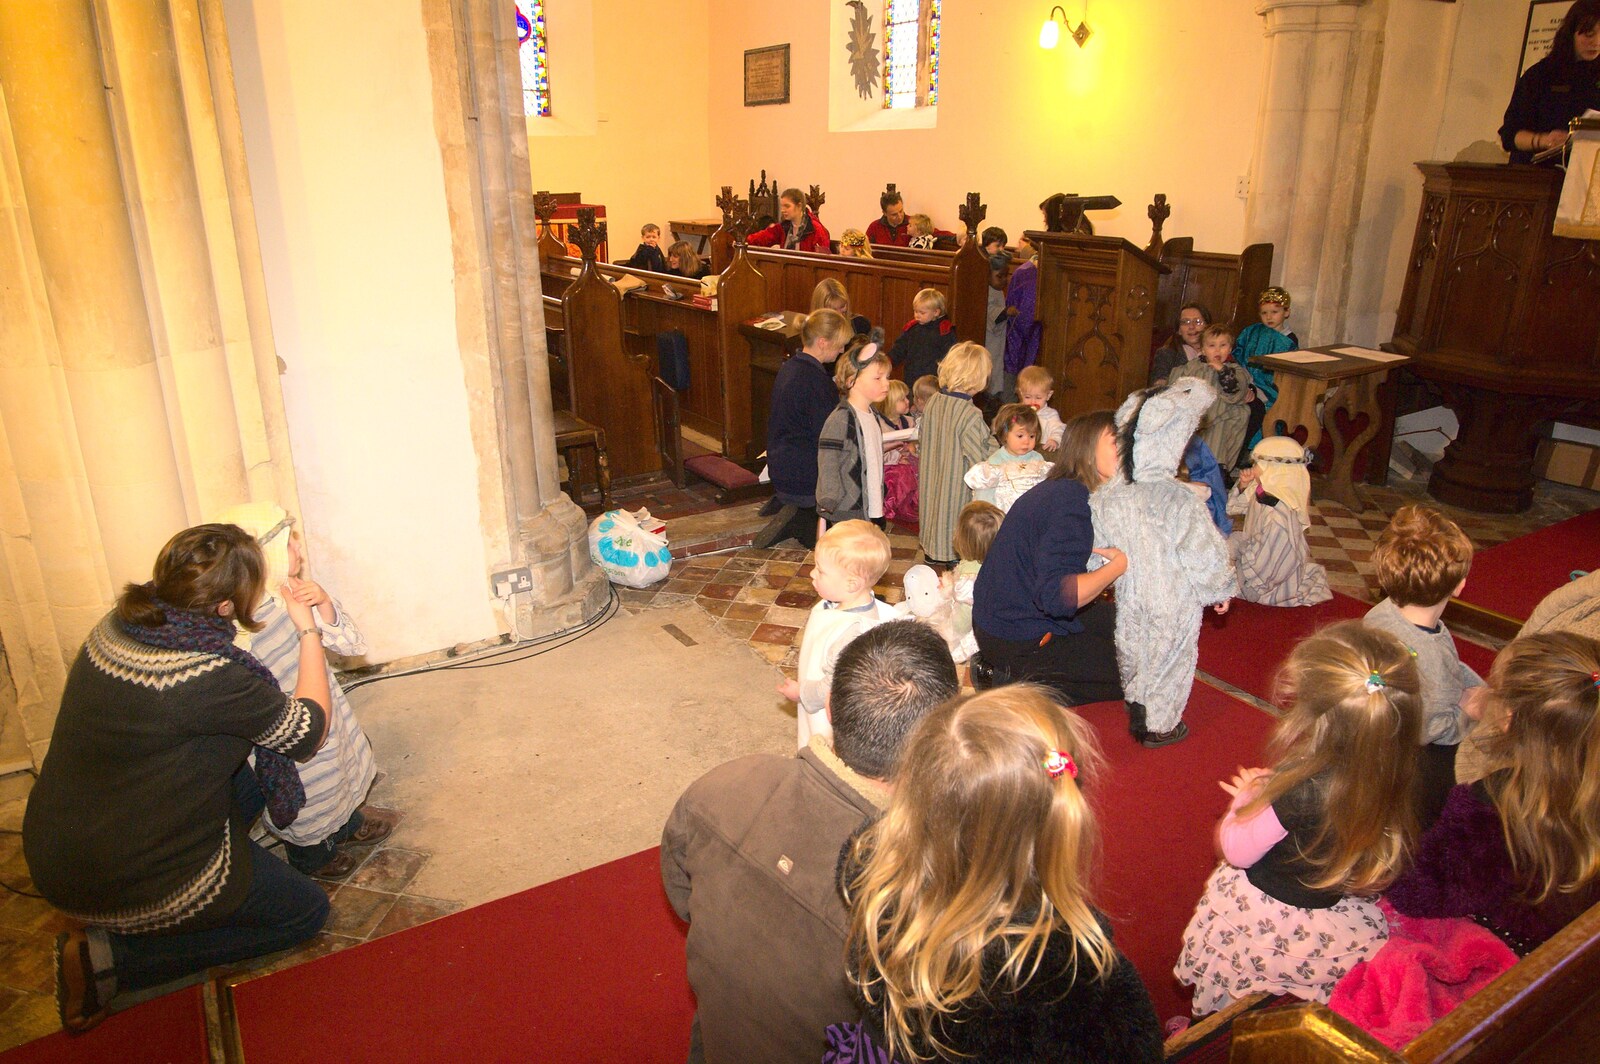 The performance kicks off from Fred's First Nativity, St. Peter's Church, Palgrave, Suffolk - 8th December 2011